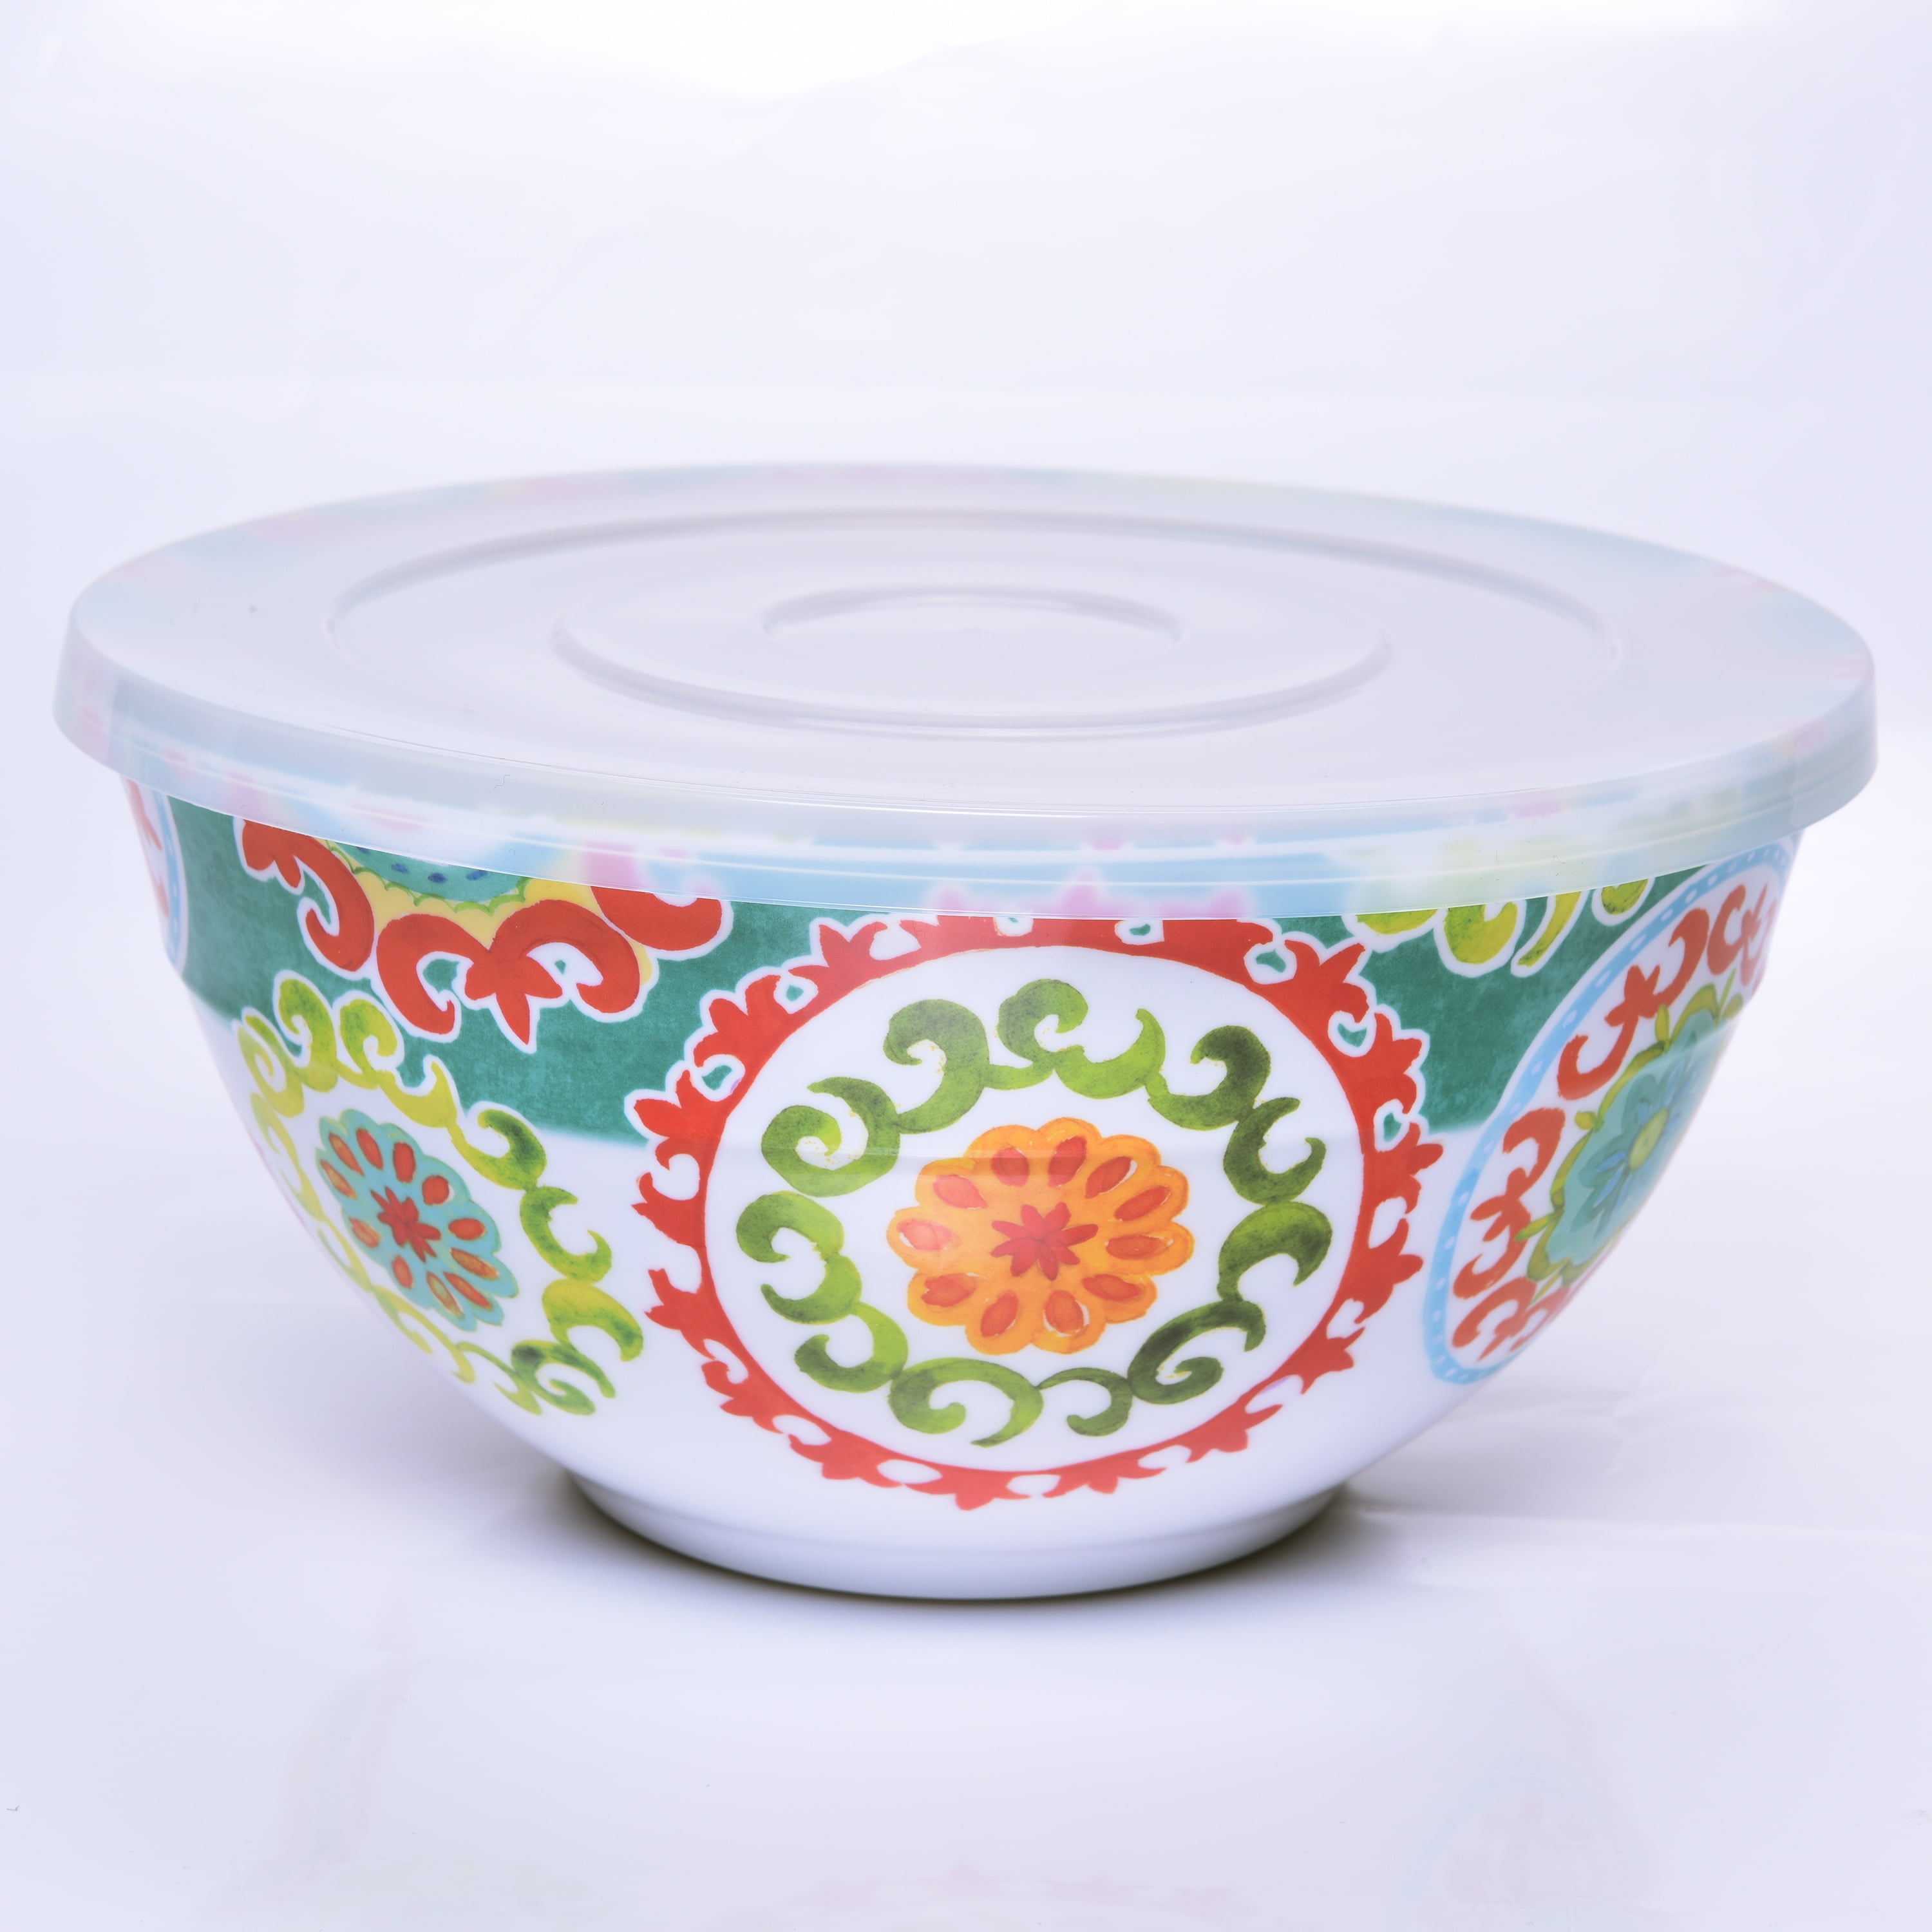 Melamine mixing bowls with lids for mixing and storage!! 🌈 Available